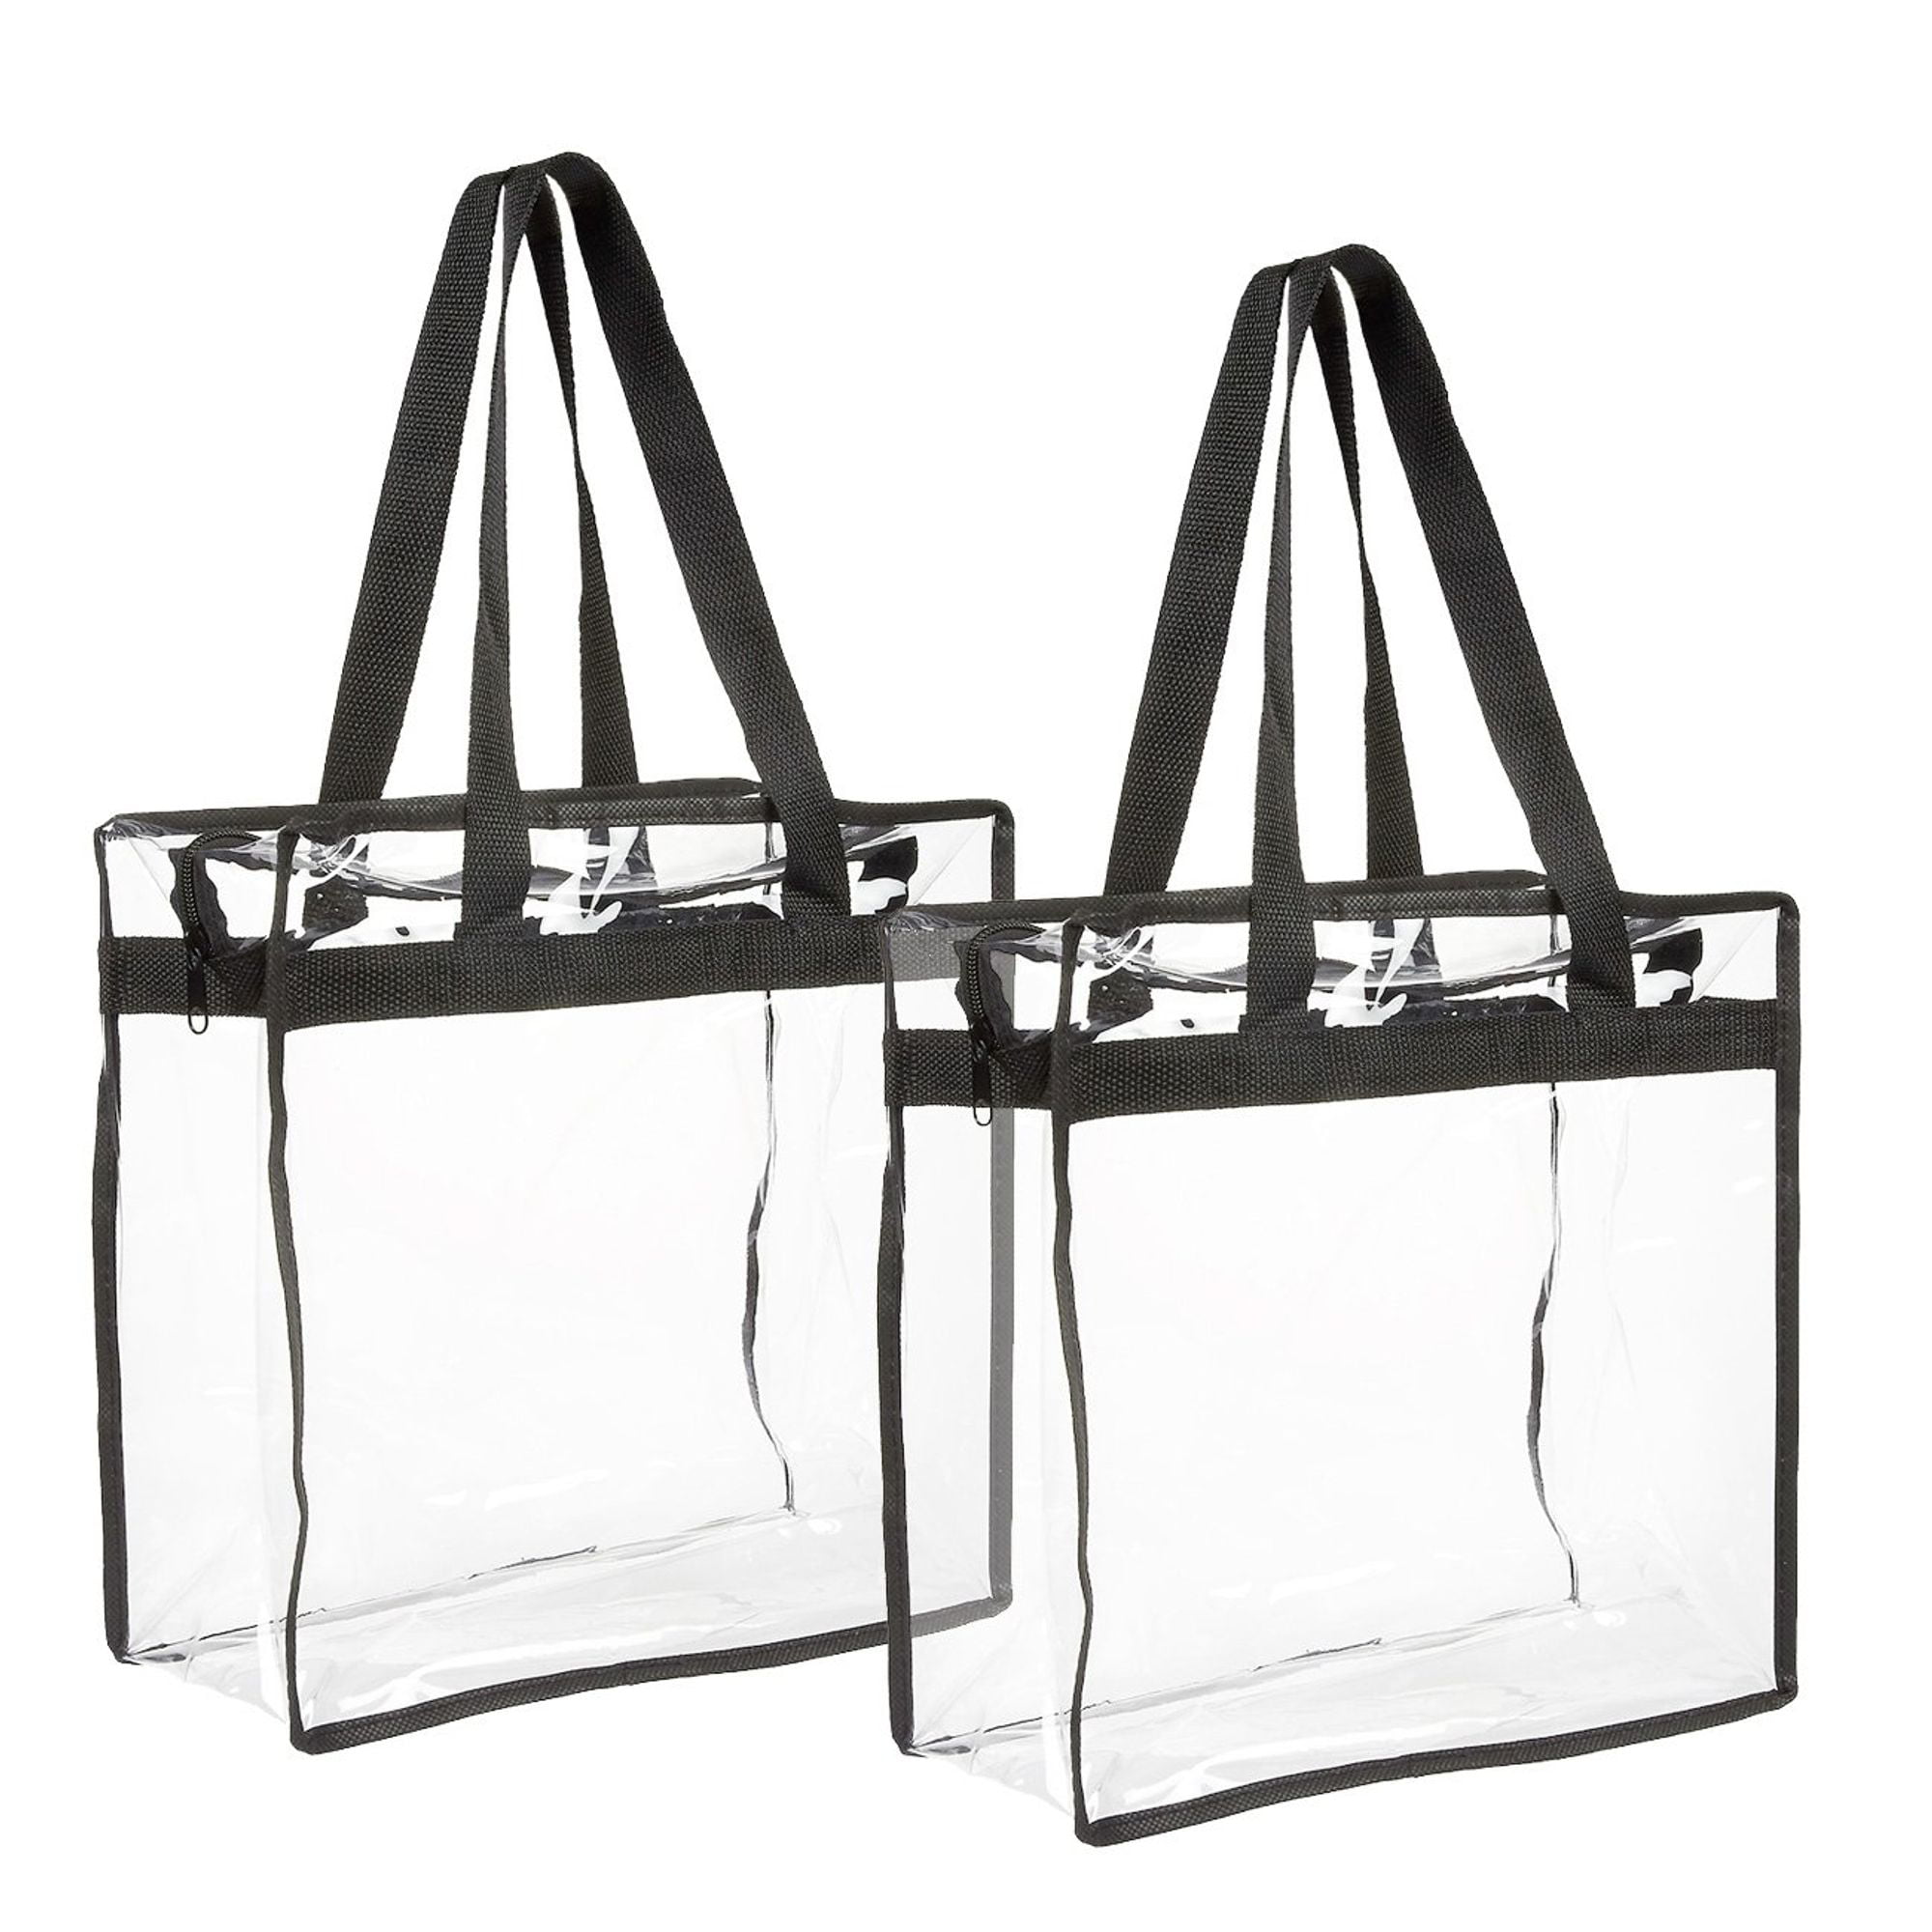 Juoxeepy Clear Bag Stadium Approved Clear Purse Concert Stadium